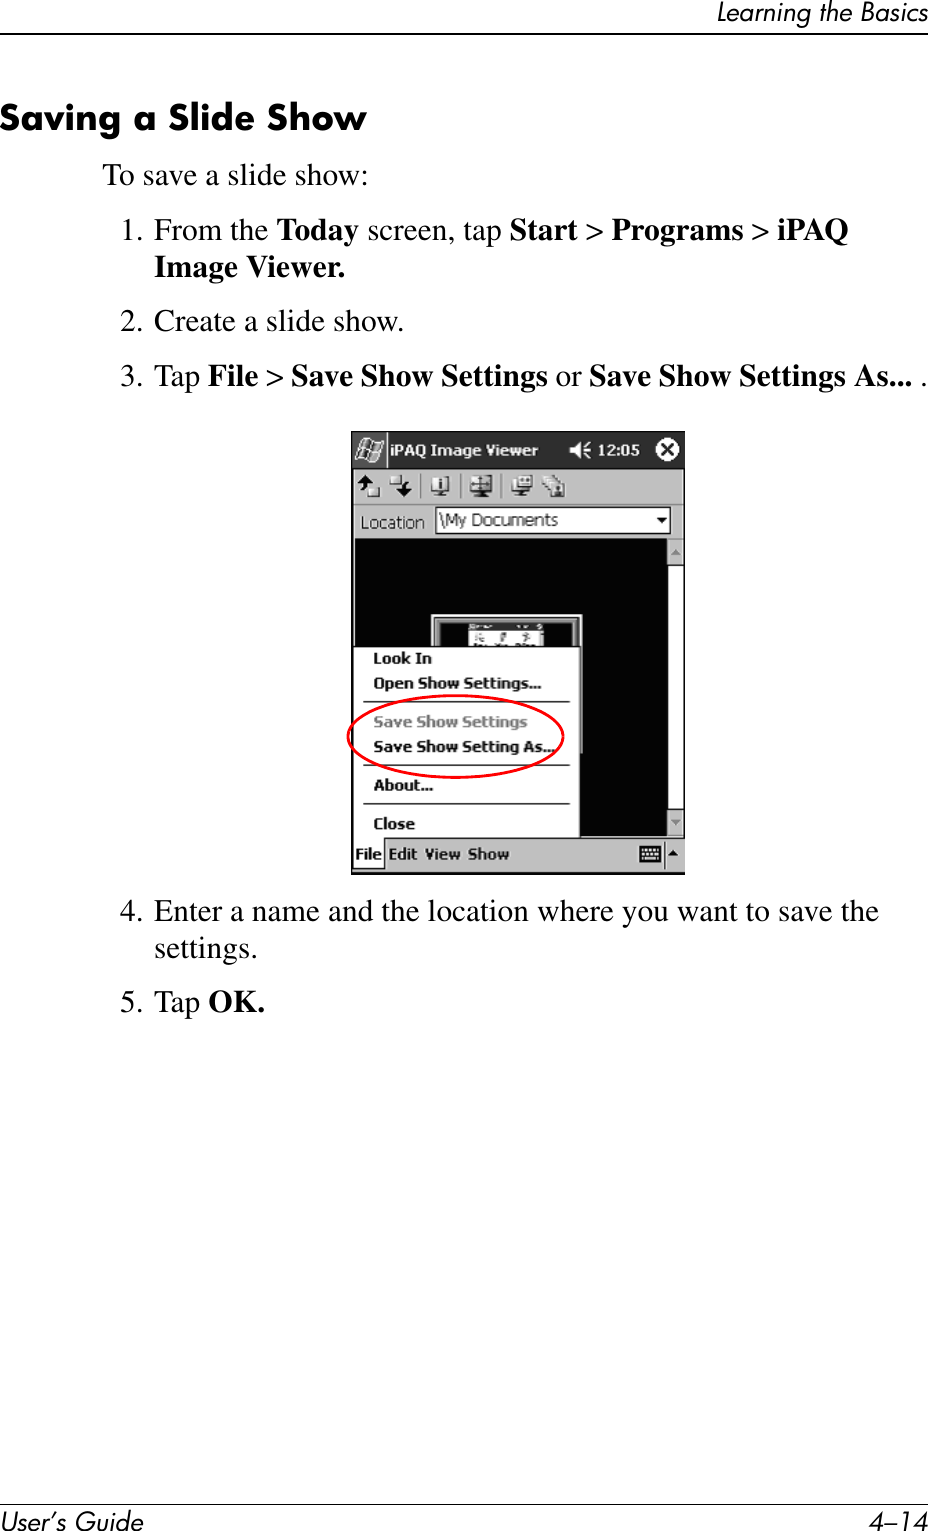 User’s Guide 4–14Learning the BasicsSaving a Slide ShowTo save a slide show:1. From the Today screen, tap Start &gt; Programs &gt; iPAQ Image Viewer.2. Create a slide show.3. Tap File &gt; Save Show Settings or Save Show Settings As... .4. Enter a name and the location where you want to save the settings.5. Tap OK.